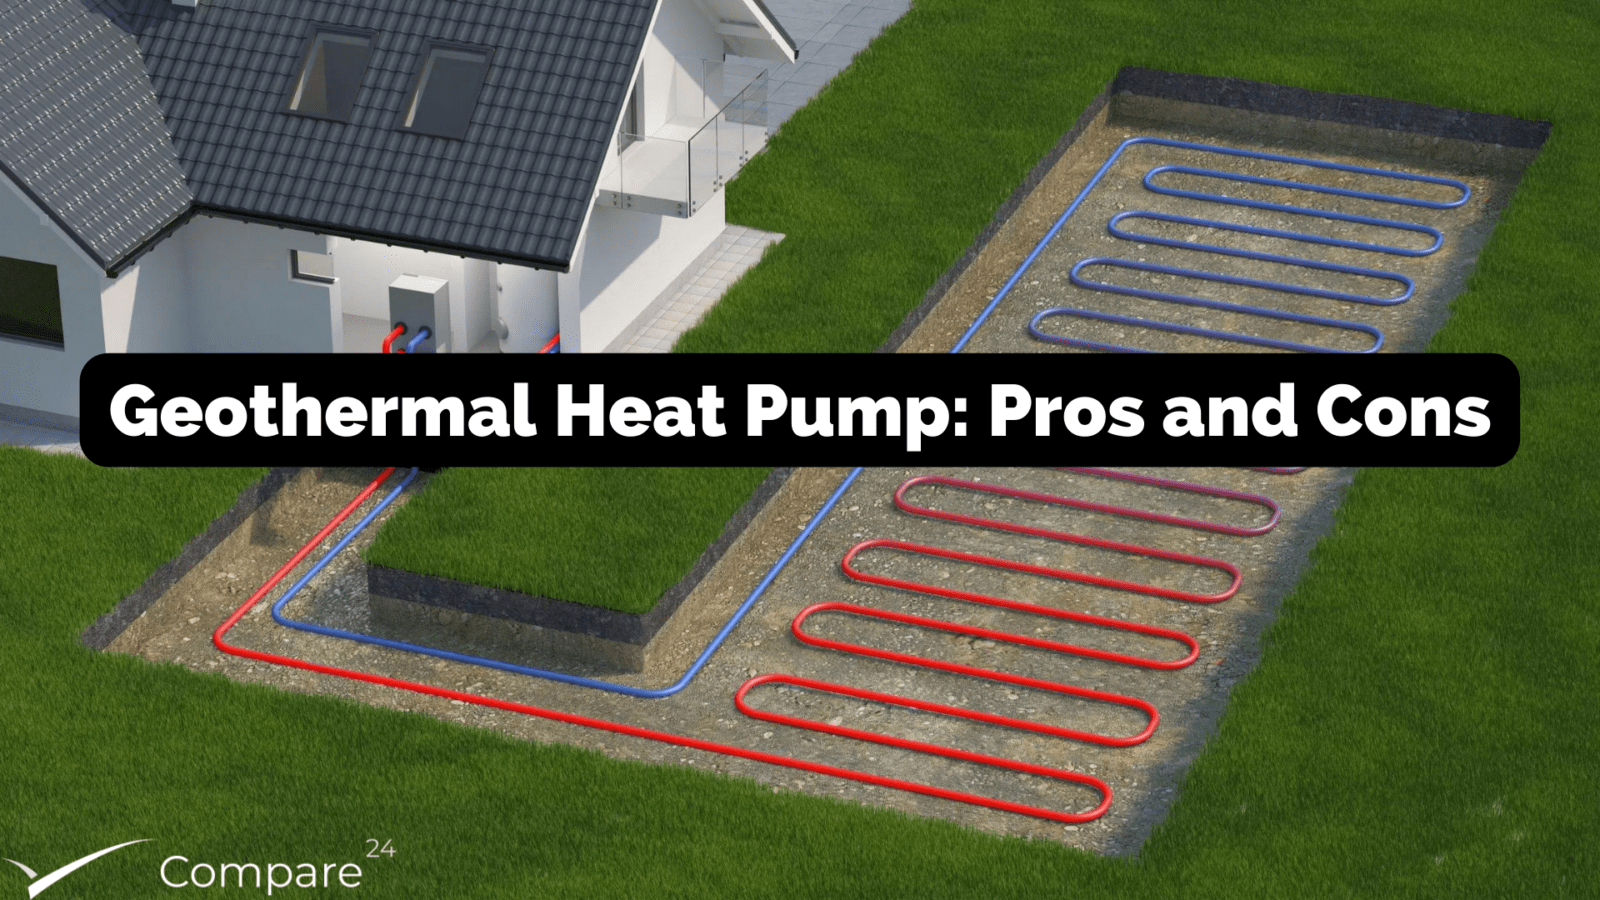 Geothermal Heat Pump: Pros and Cons